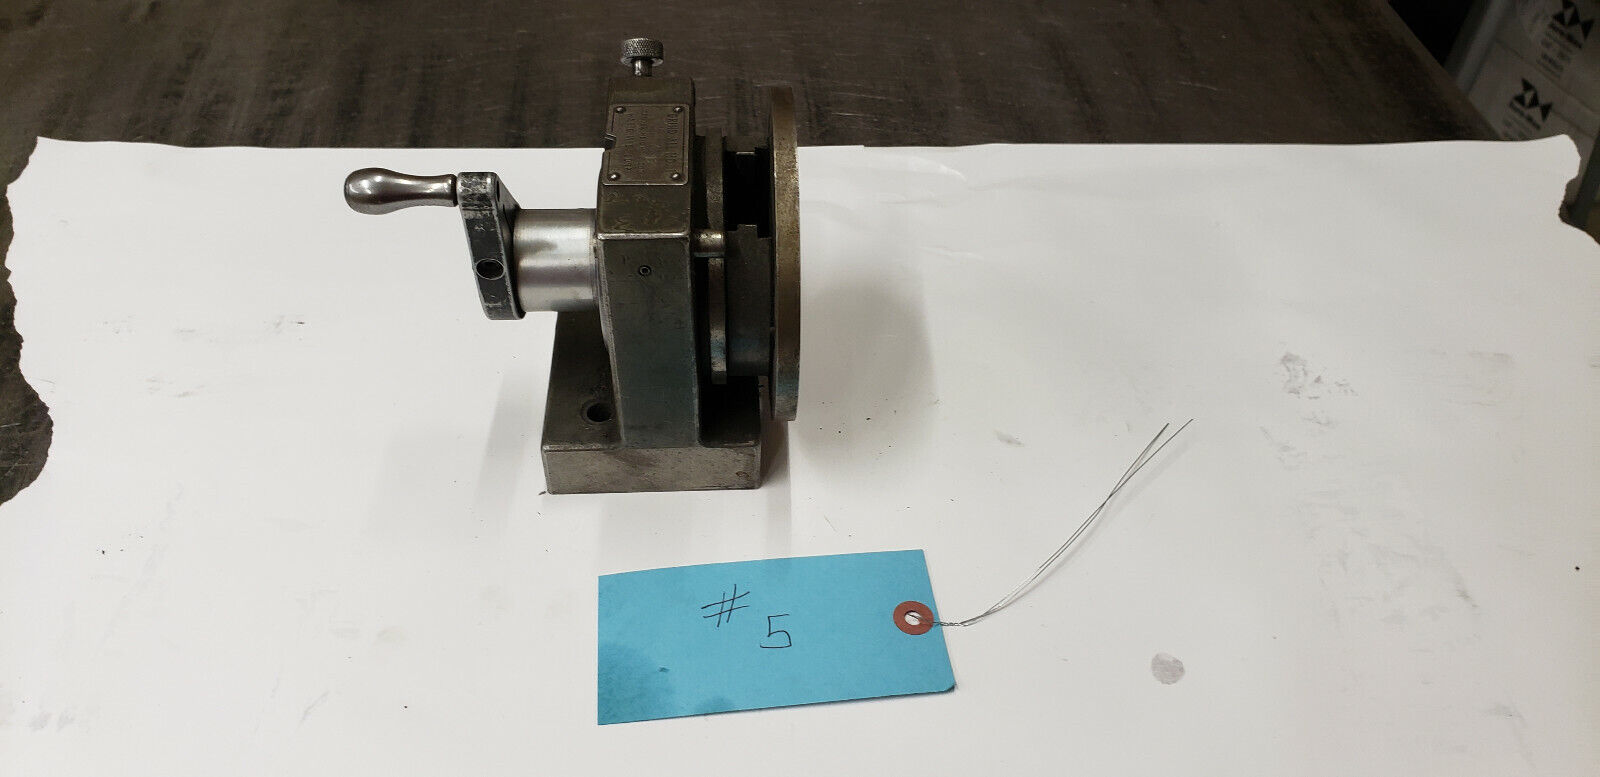 Harig No. 1 #1  Grind All Spin Grinding Fixture.  Lot#5 Blue Tag